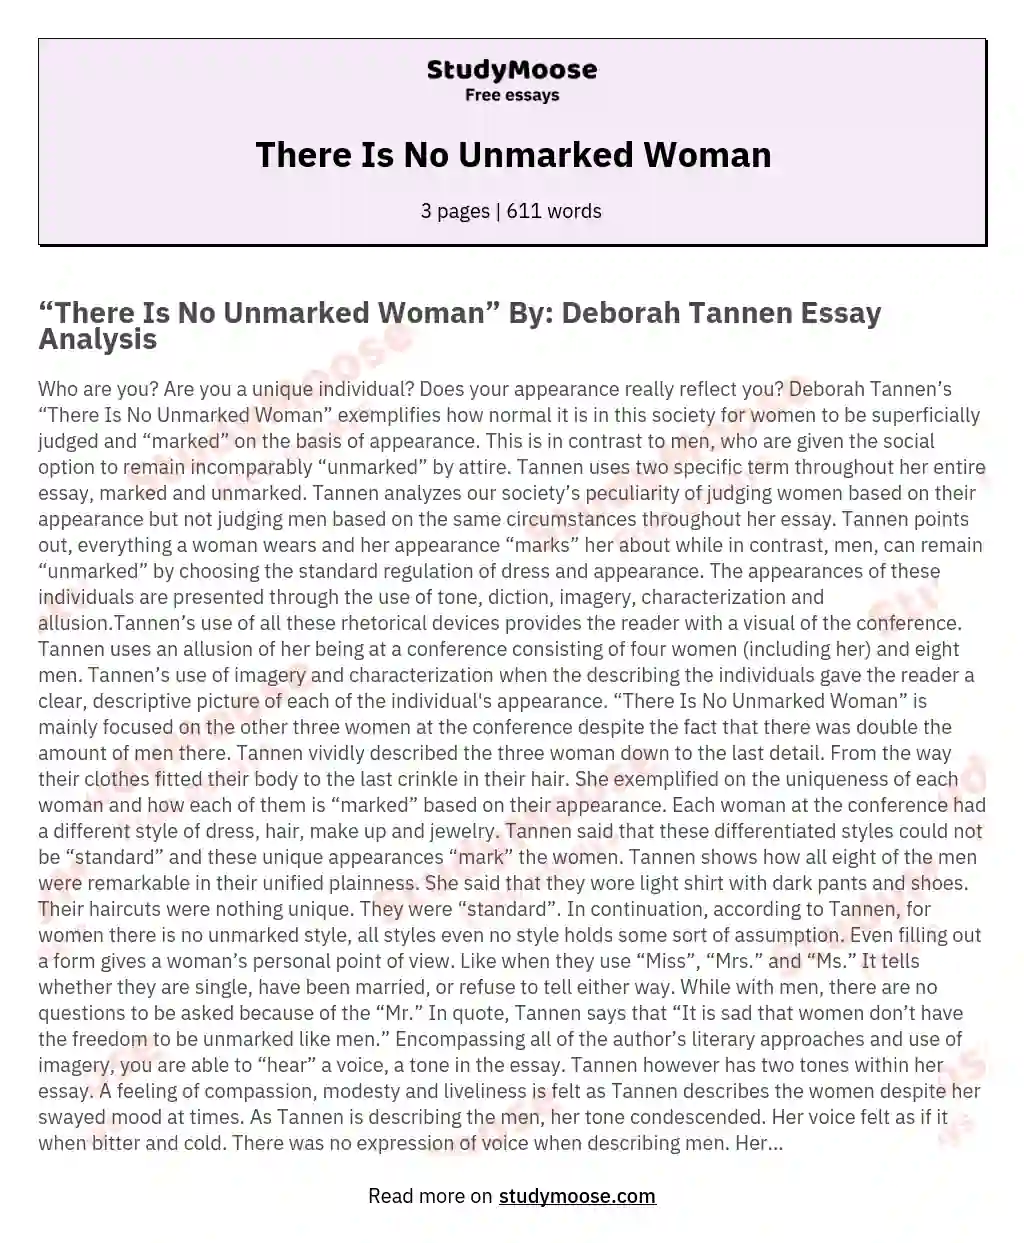 There Is No Unmarked Woman essay